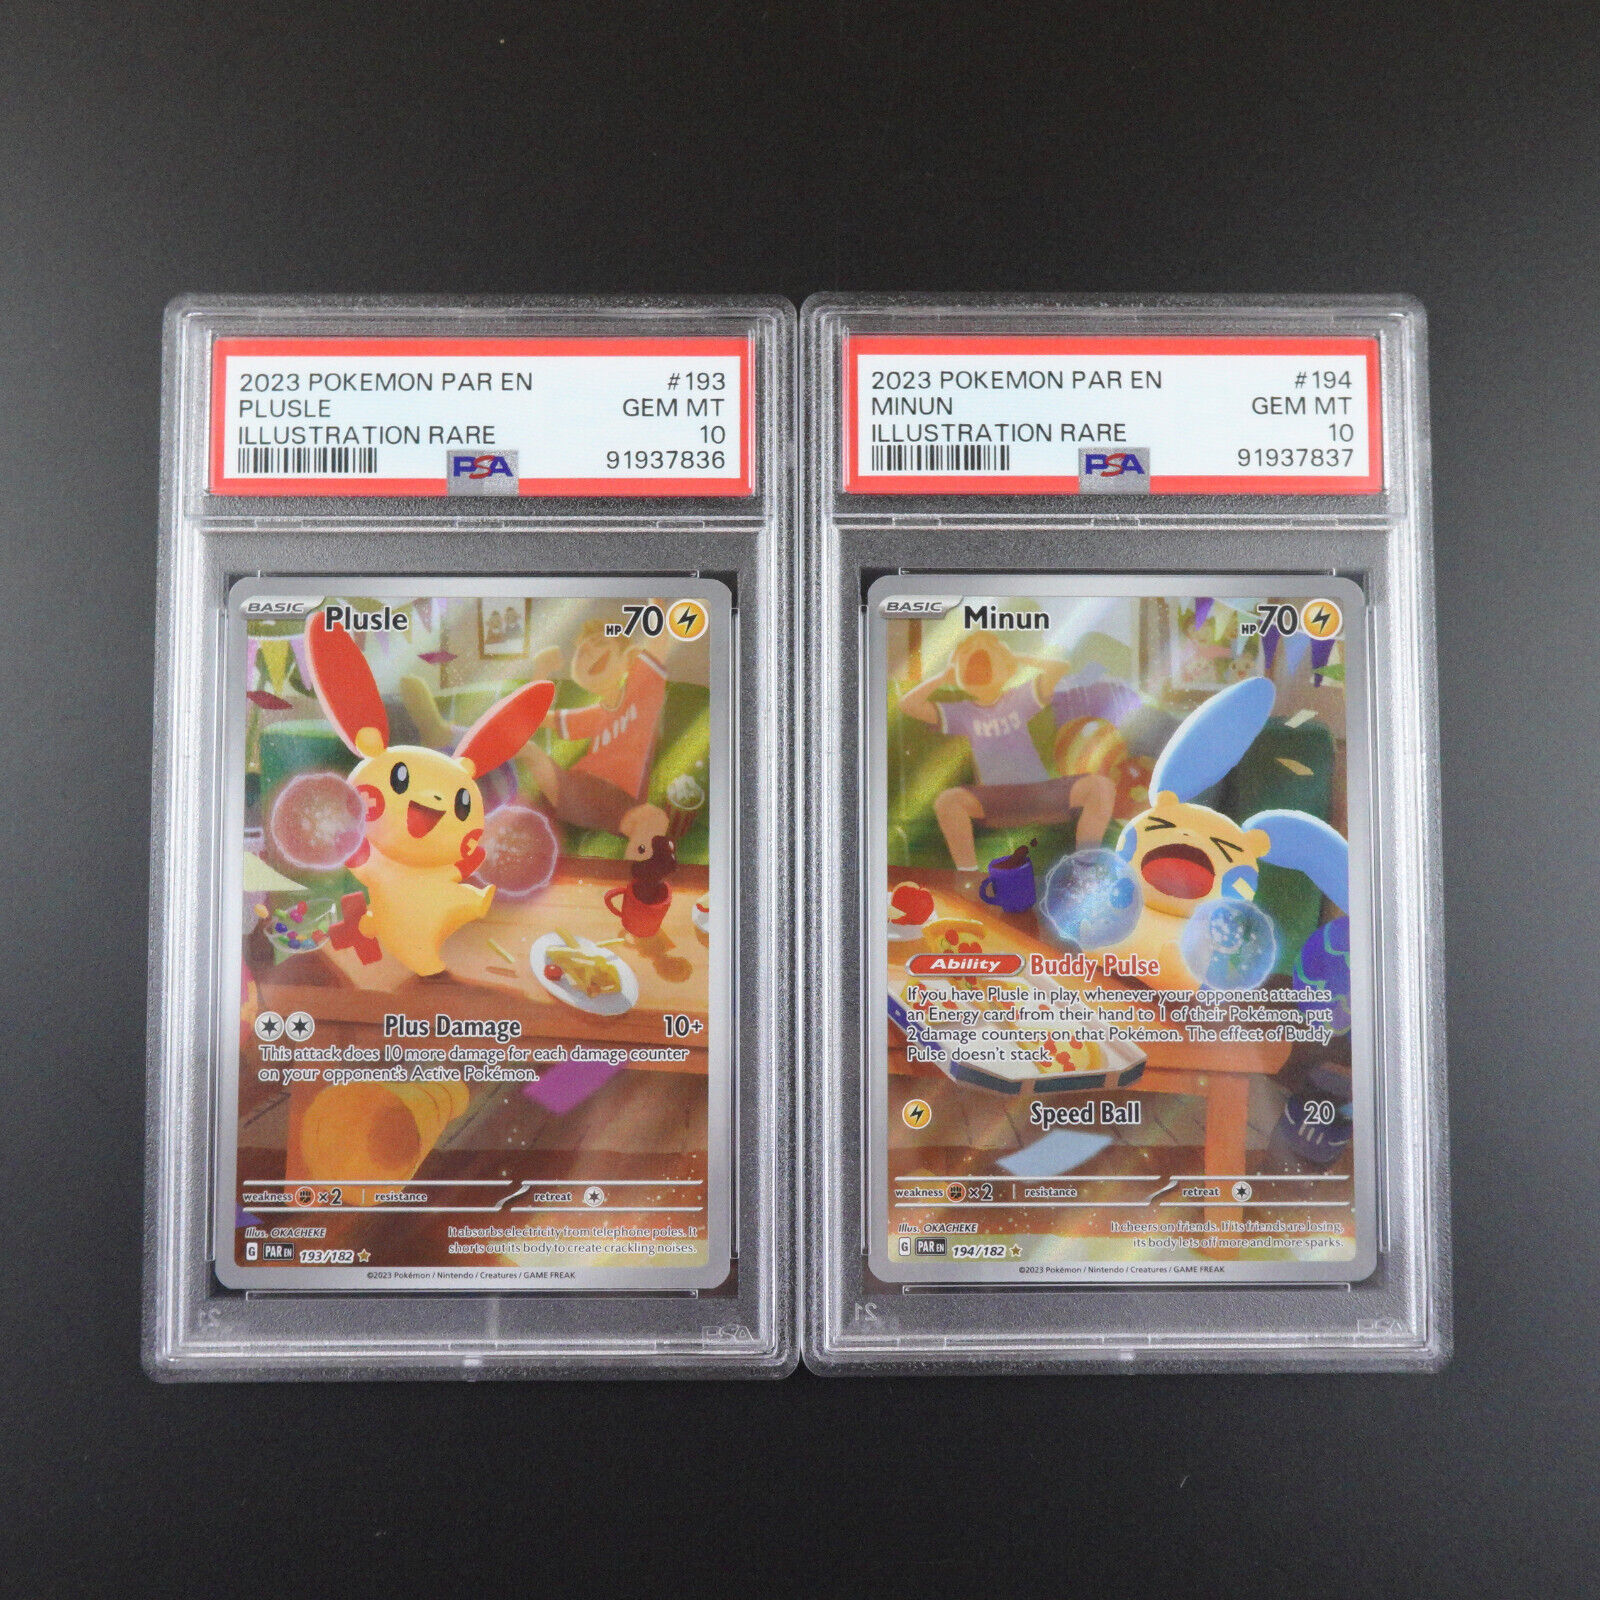 PSA 10 Plusle 193 & Minun 194 Sequential Paradox Rift Graded Pokemon Card